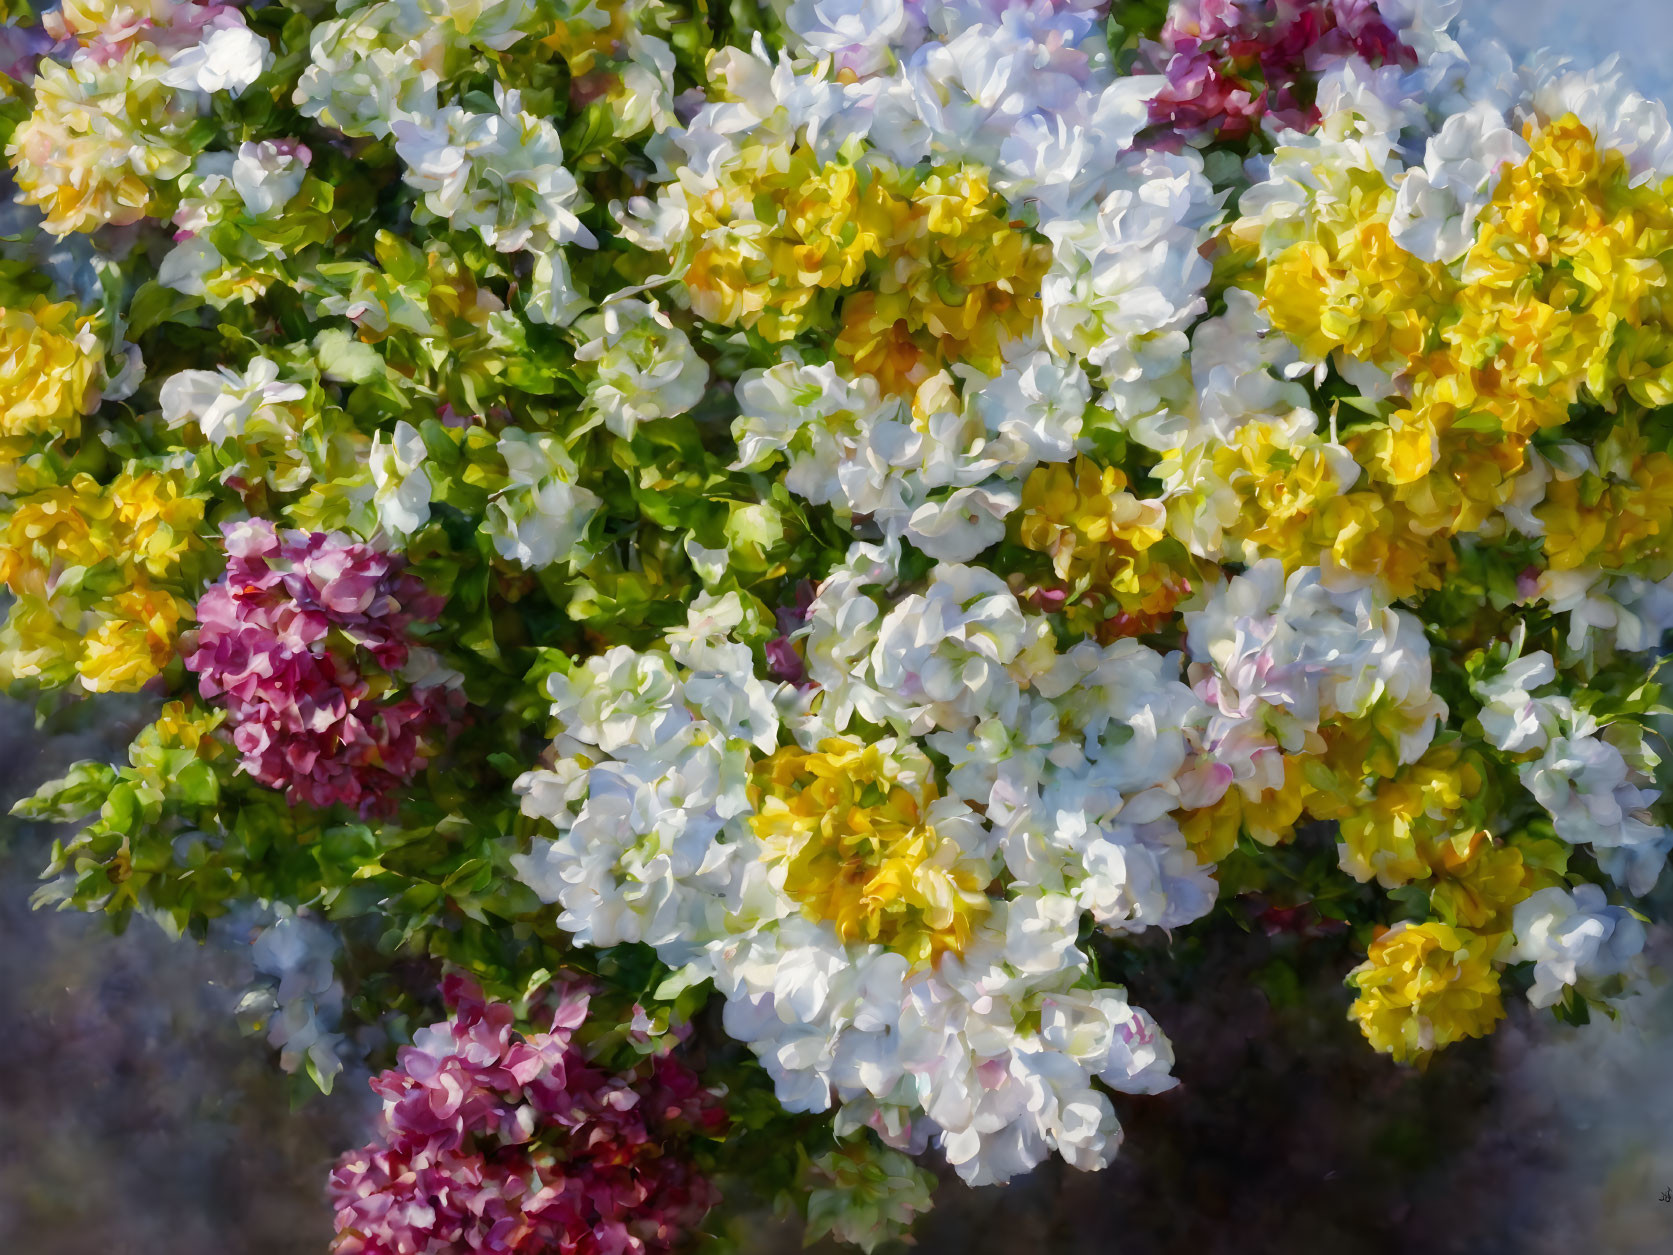 Multicolored Flower Cluster with Soft Dreamy Focus